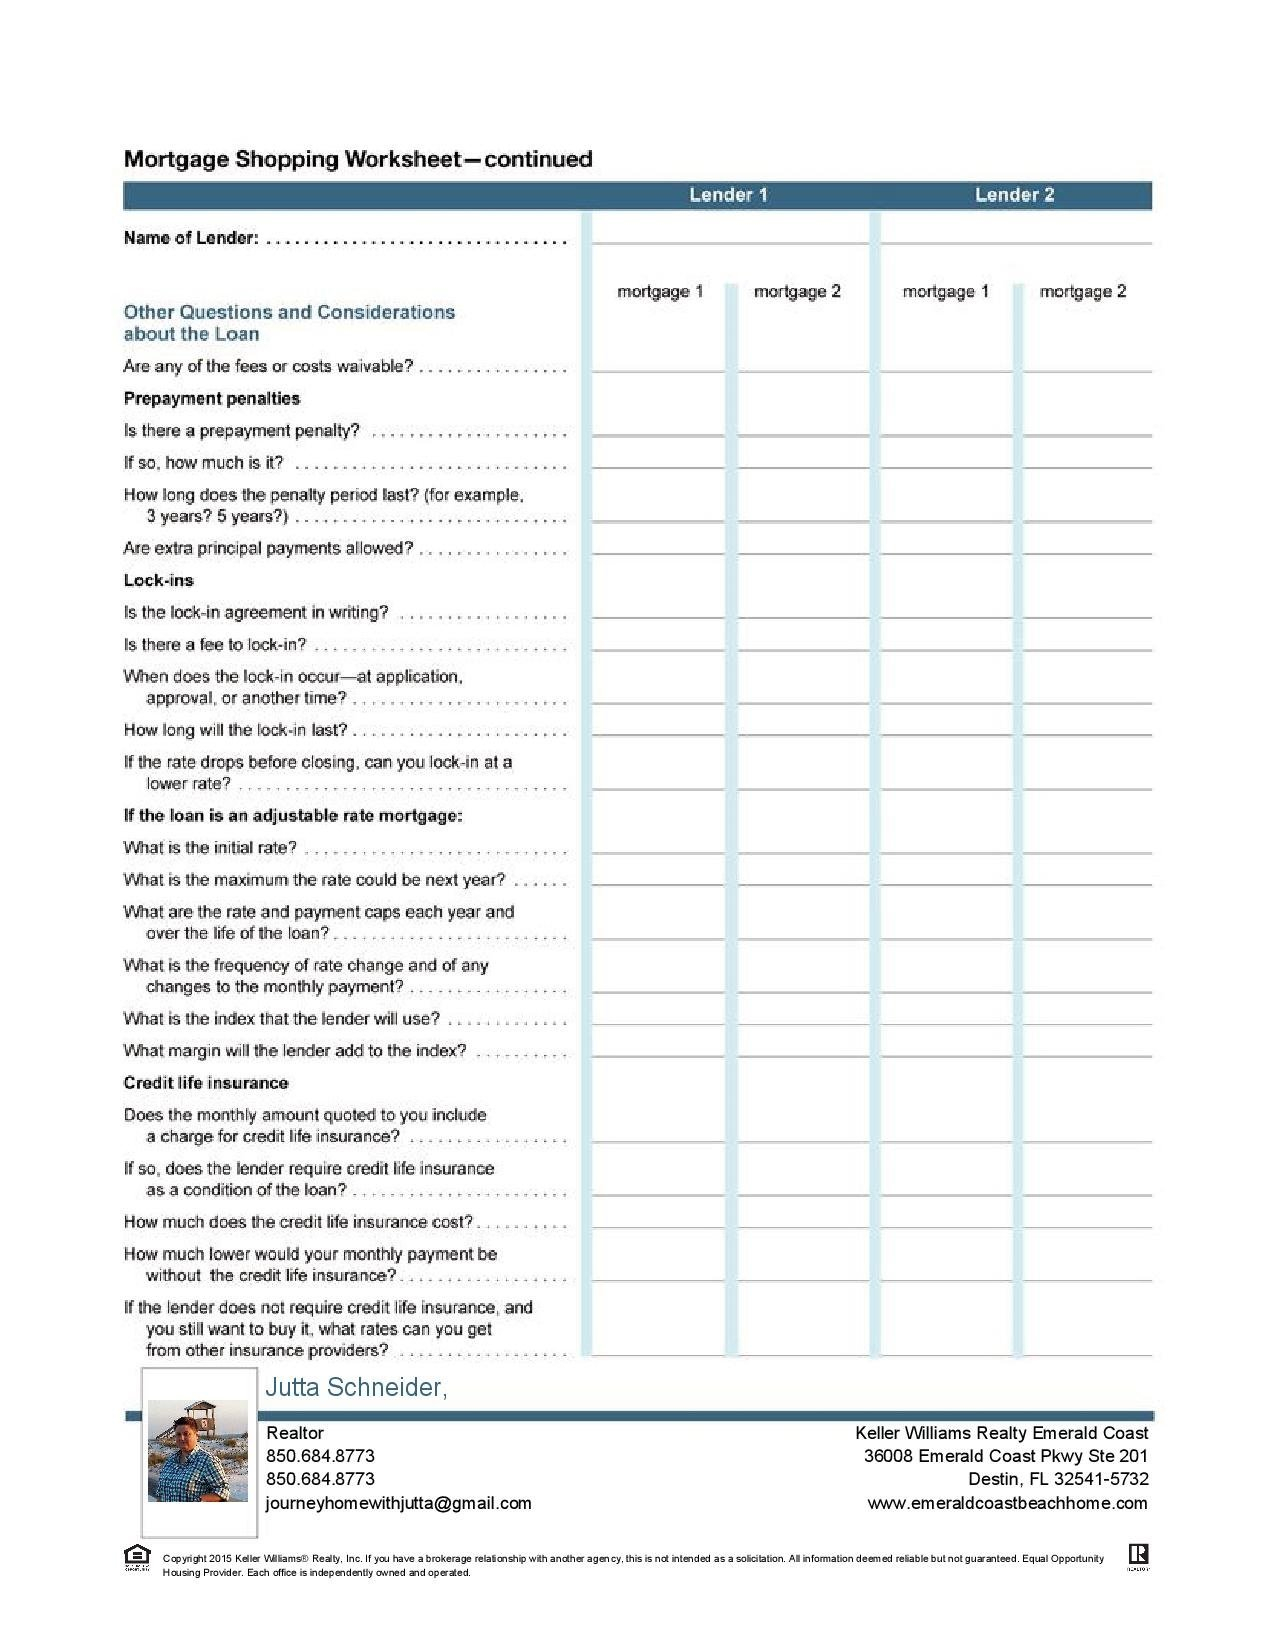 Home Mortgages Home Mortgage Worksheet Intended For Shopping For A Mortgage Worksheet Answers